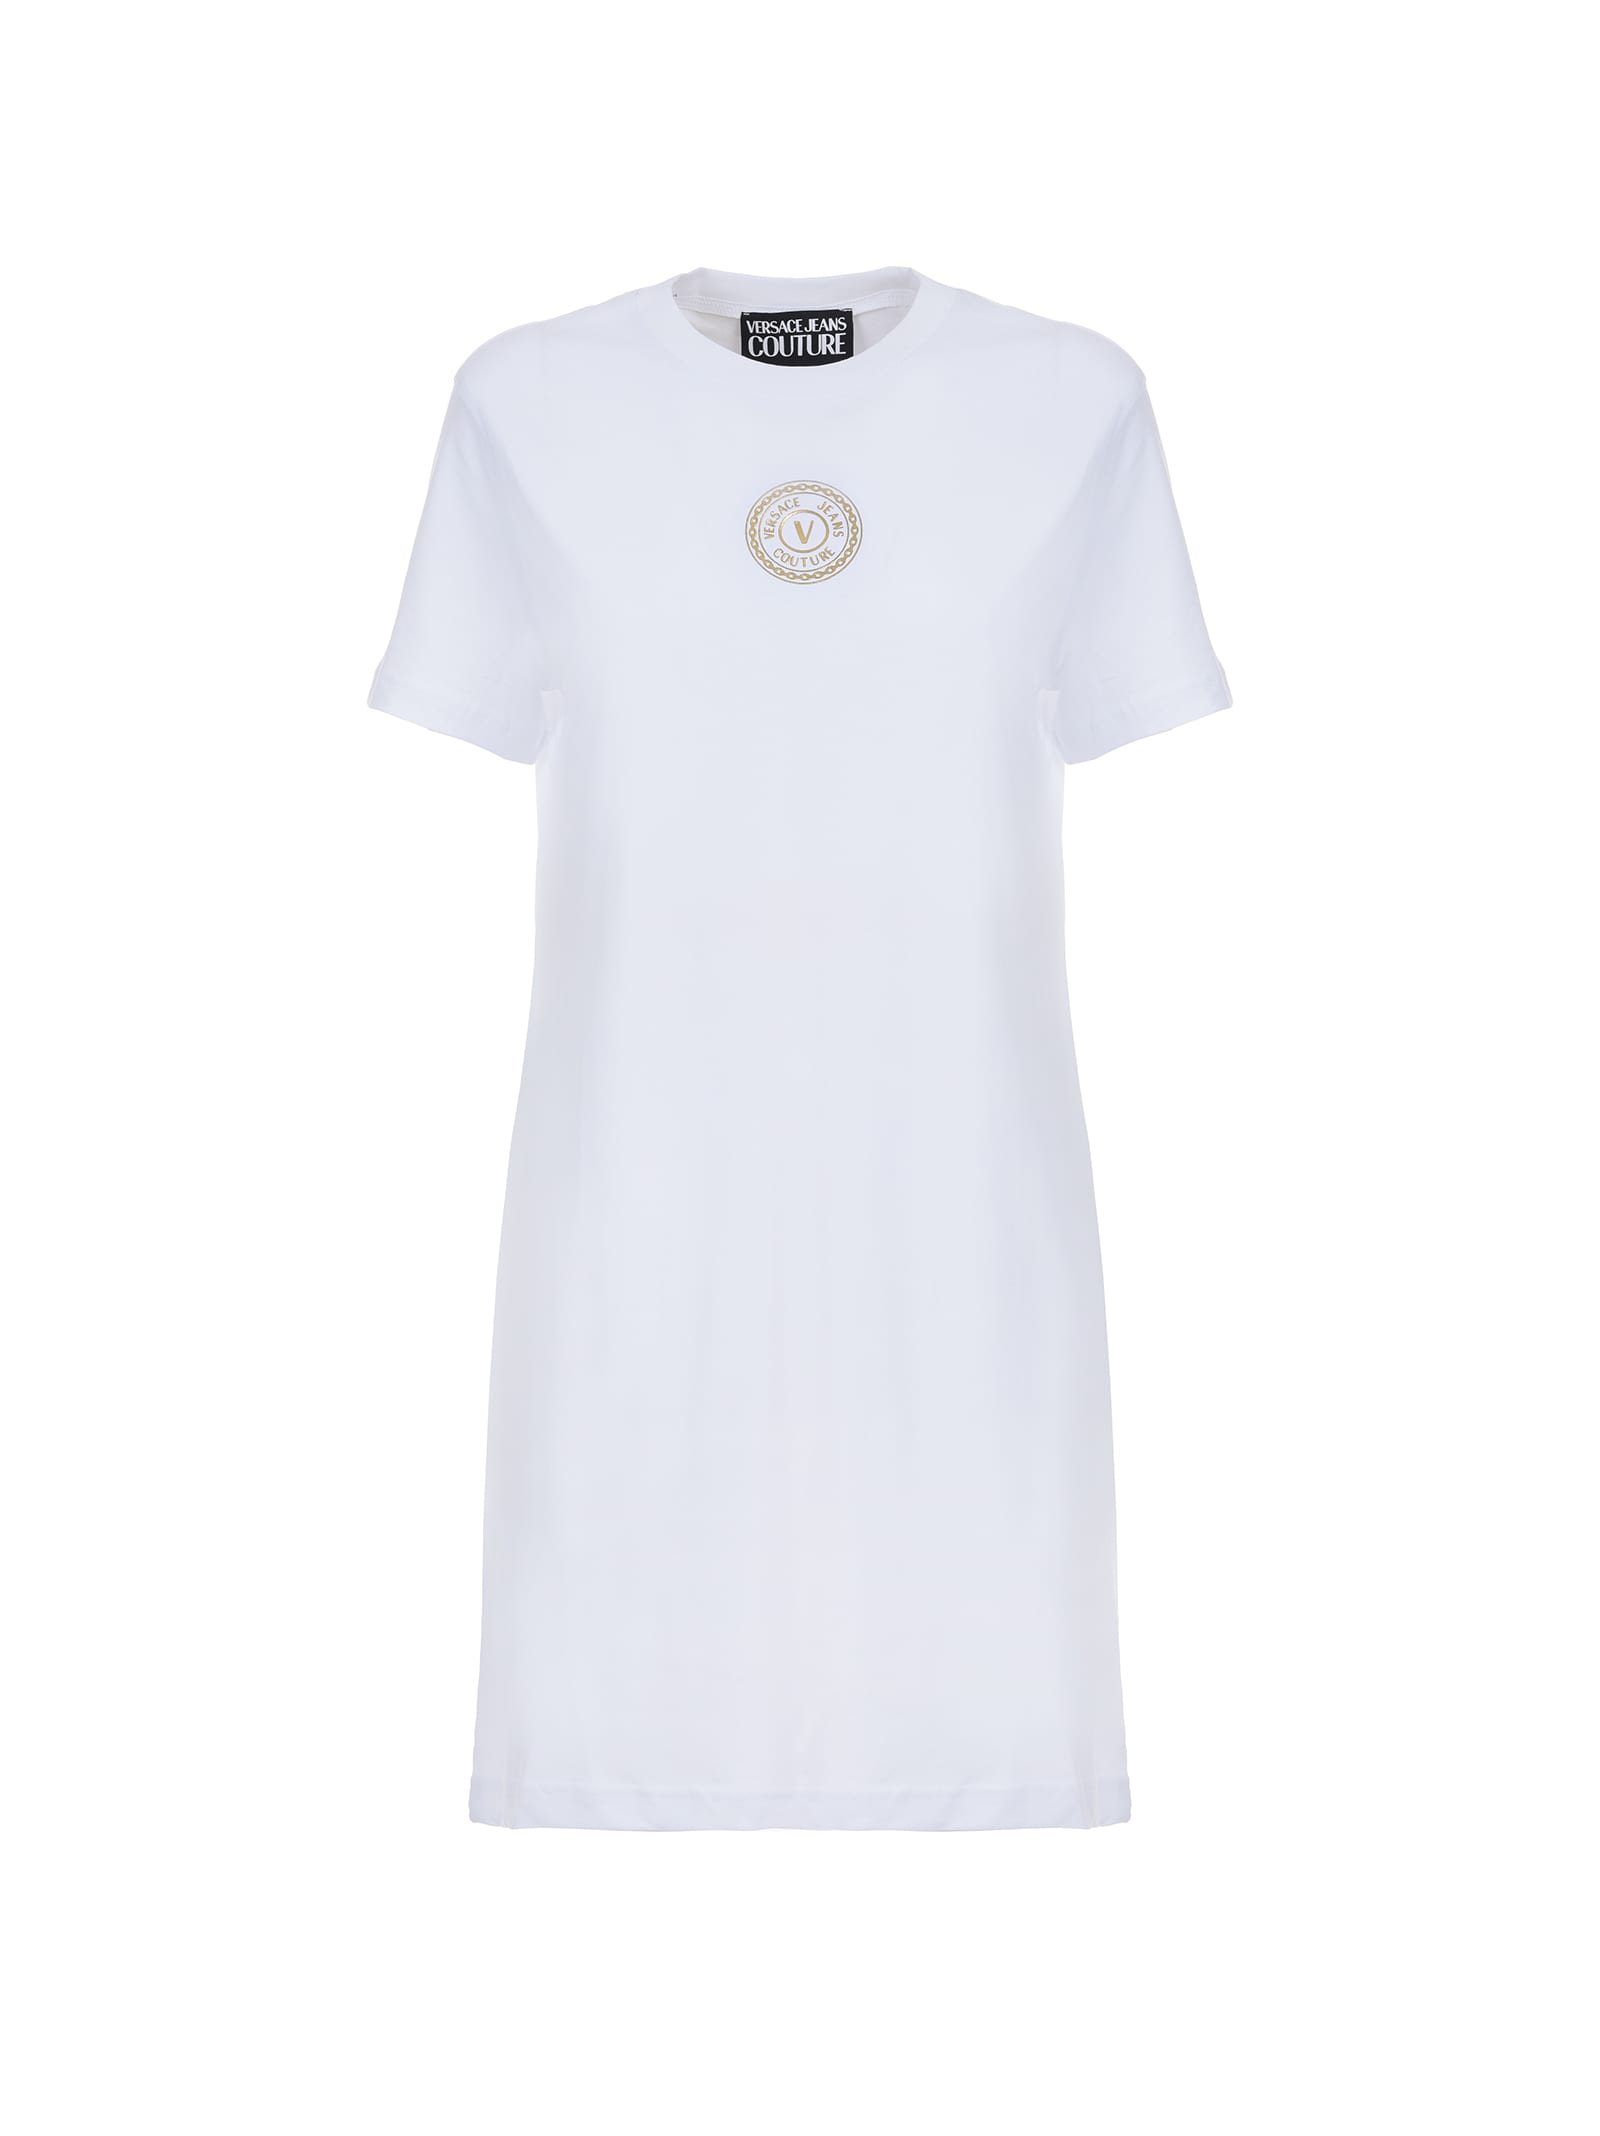 Versace Jeans Couture White Dress With Gold Emblem Logo